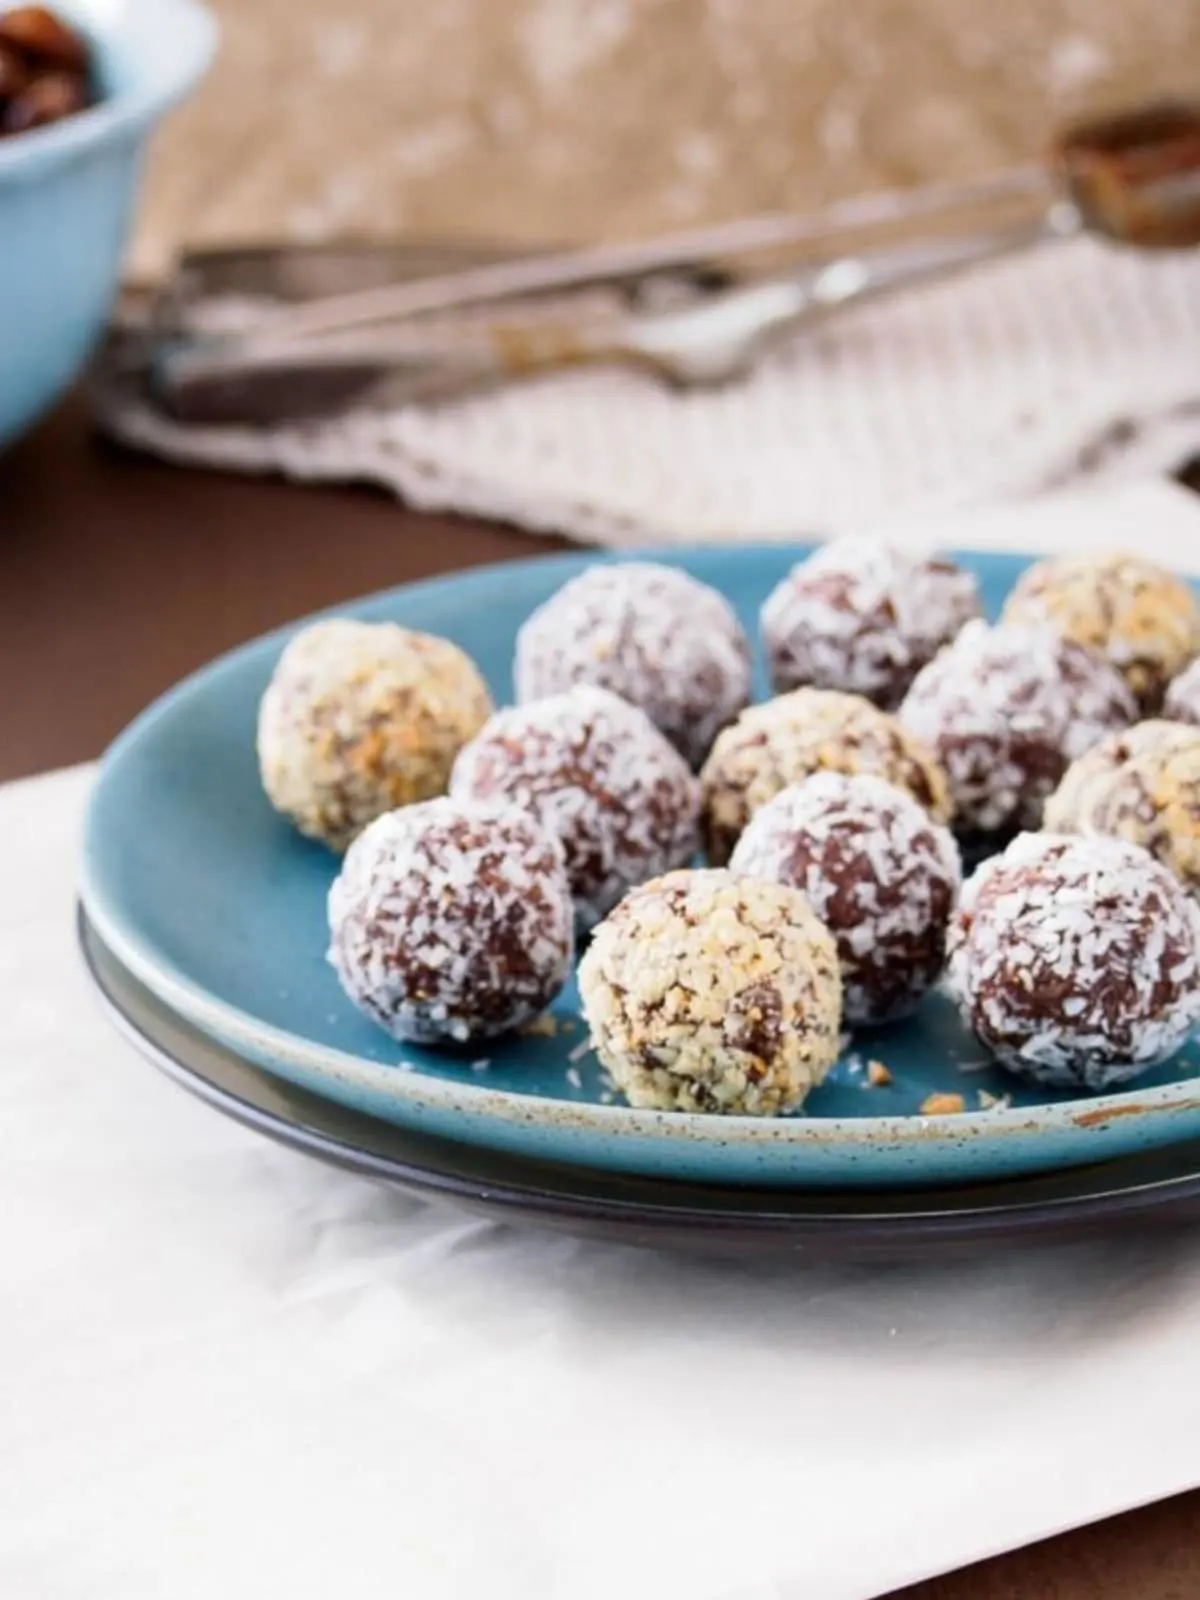 Energy balls made with dates and peanut or almond butter on dish.